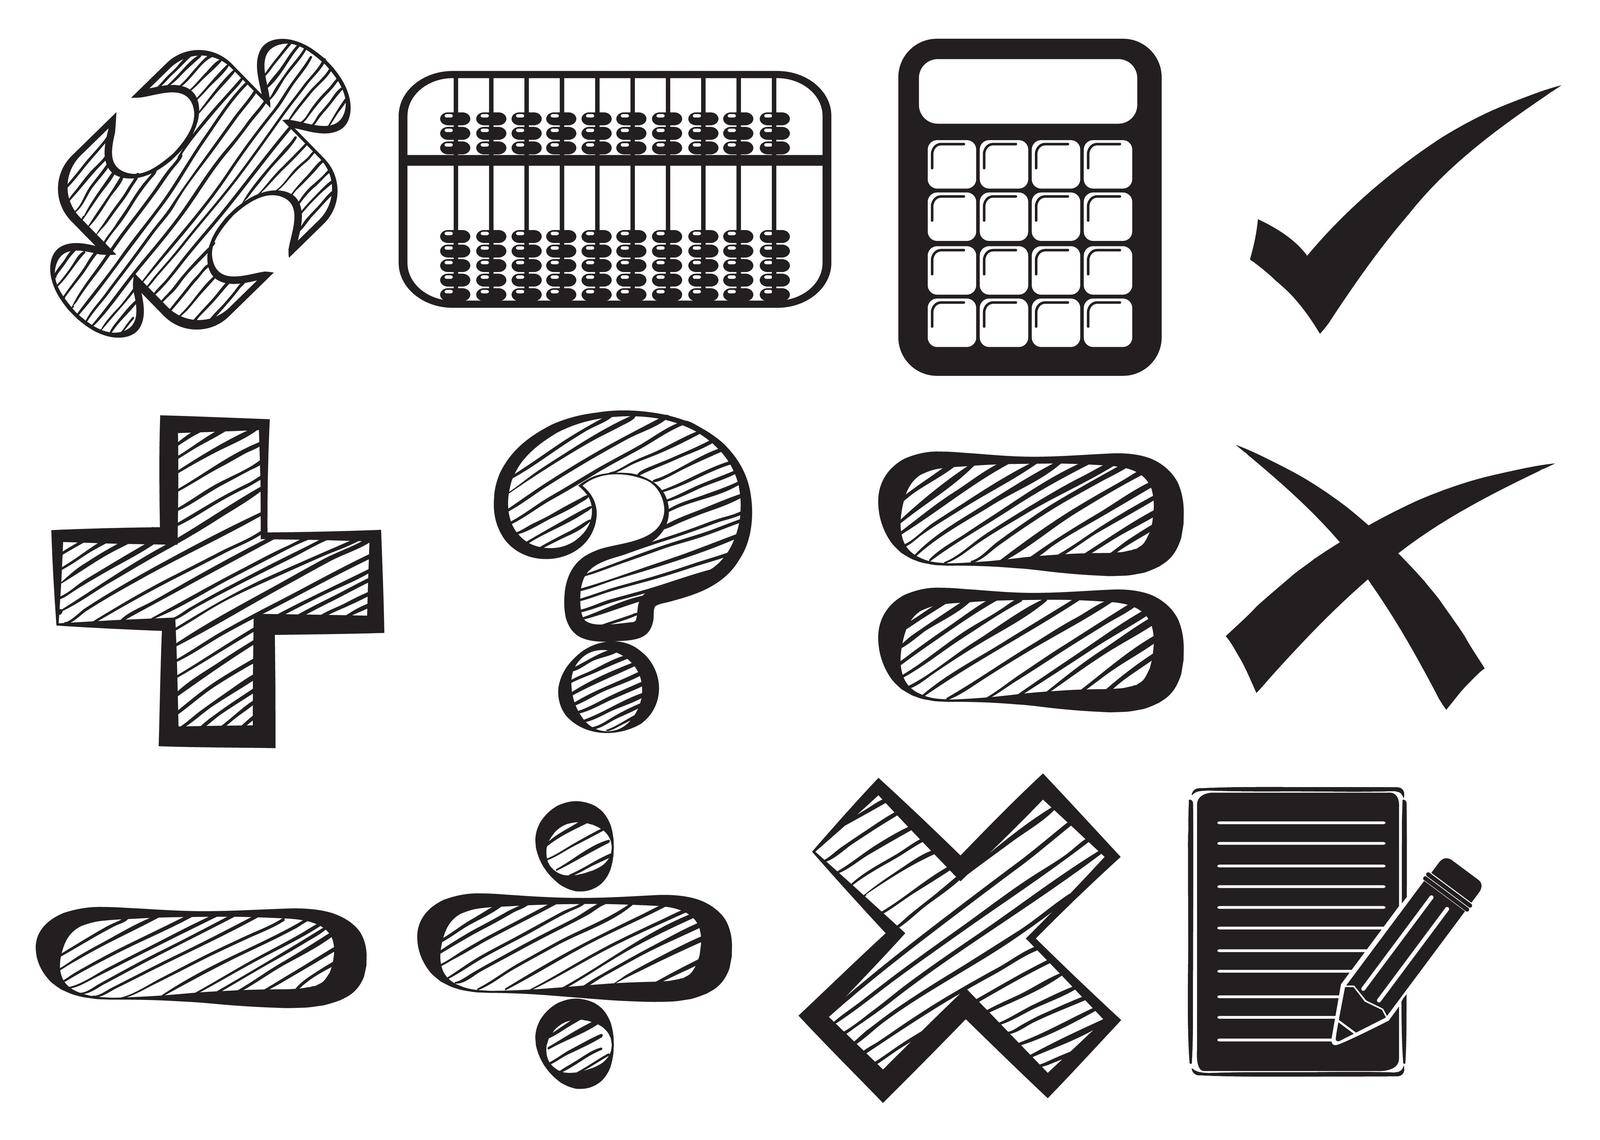 Doodle design of the different math operations on a white background